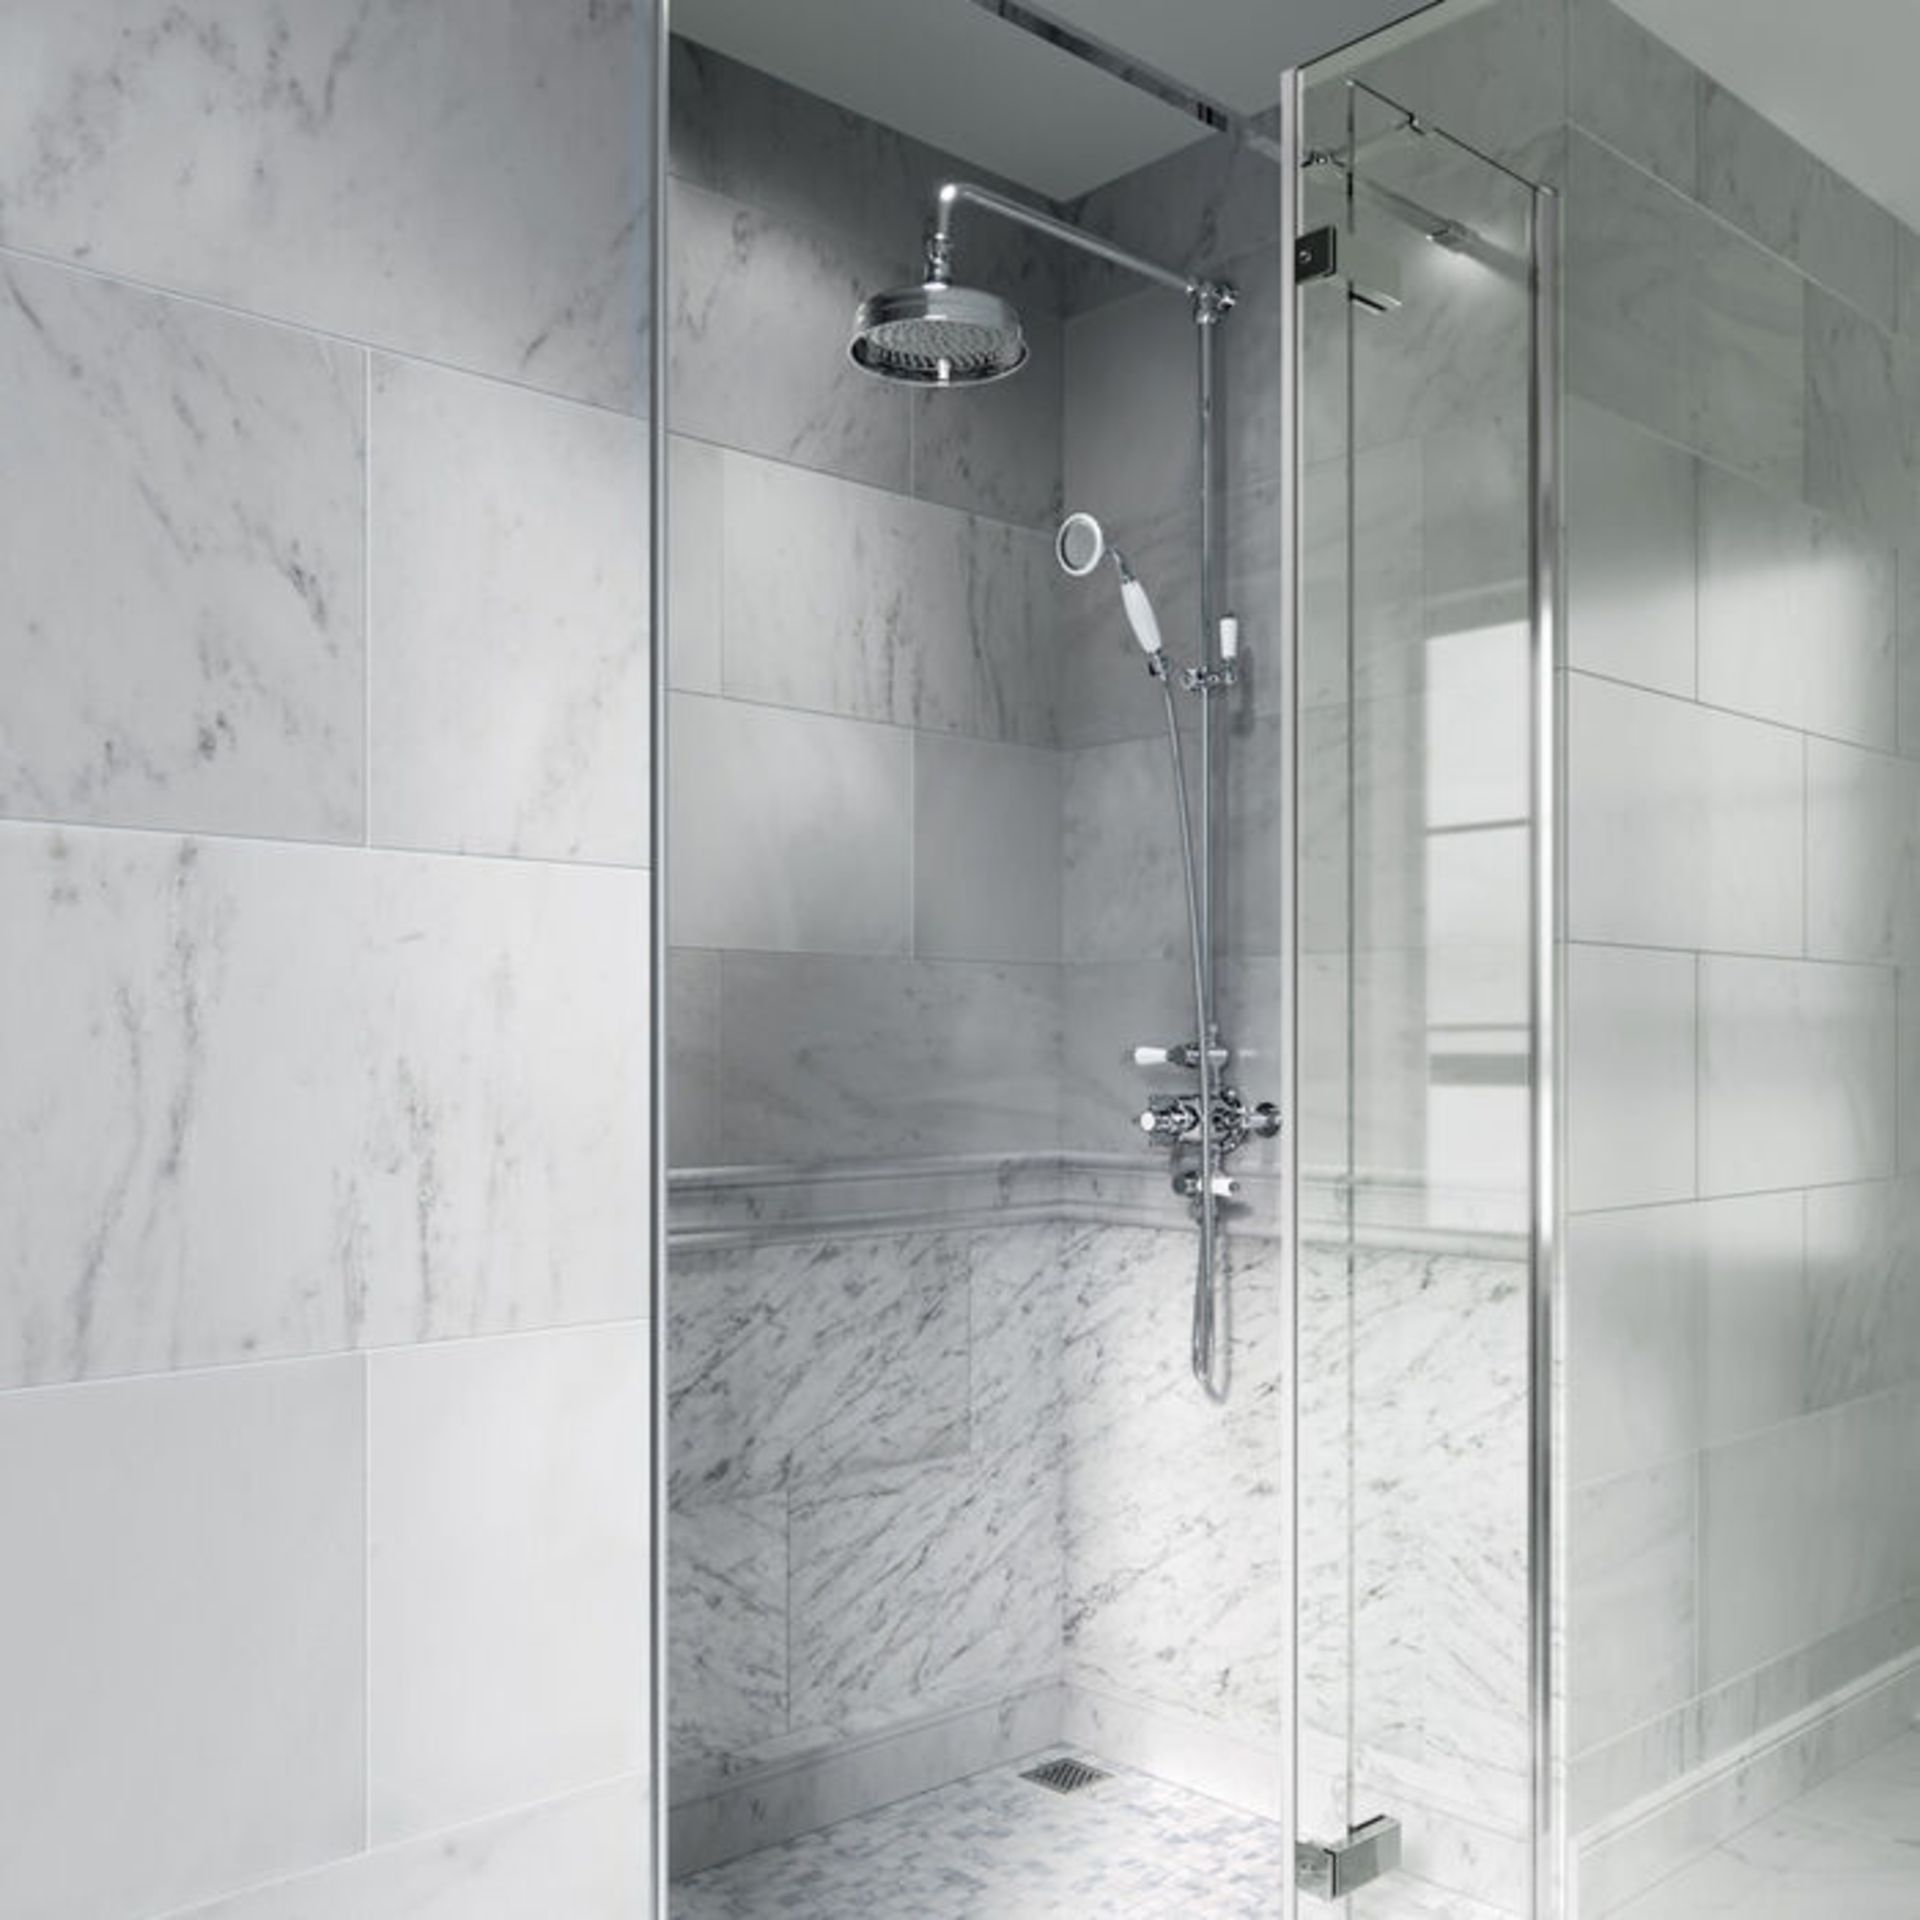 (JL9) Traditional Exposed Shower Kit & Medium Head- Melbourne. RRP £489.99. Traditional expose... - Image 4 of 4